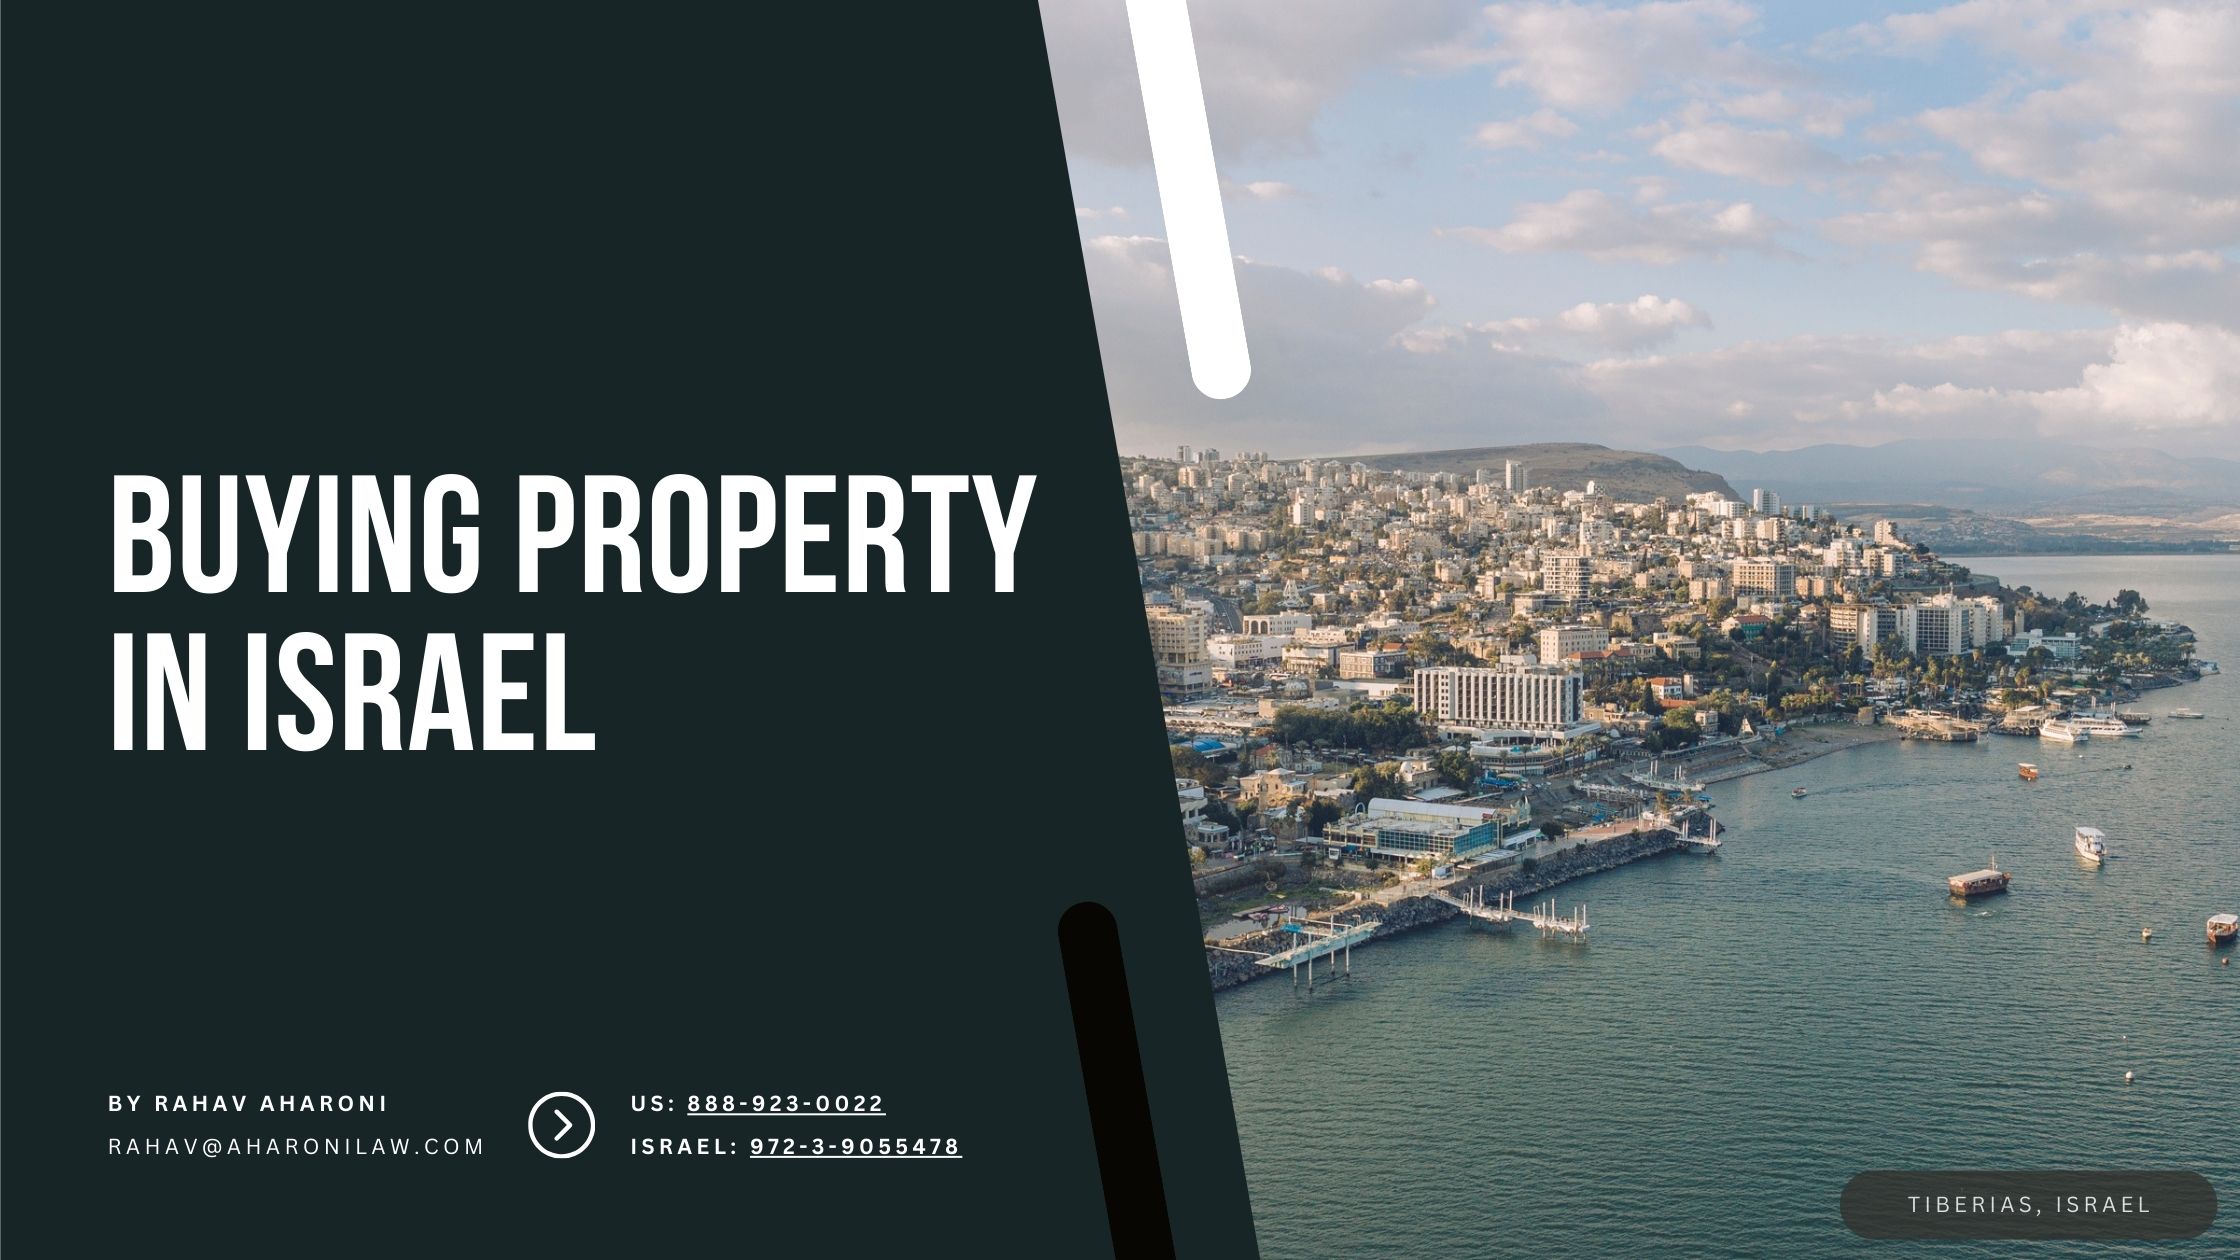 How To Buy Property In Israel?